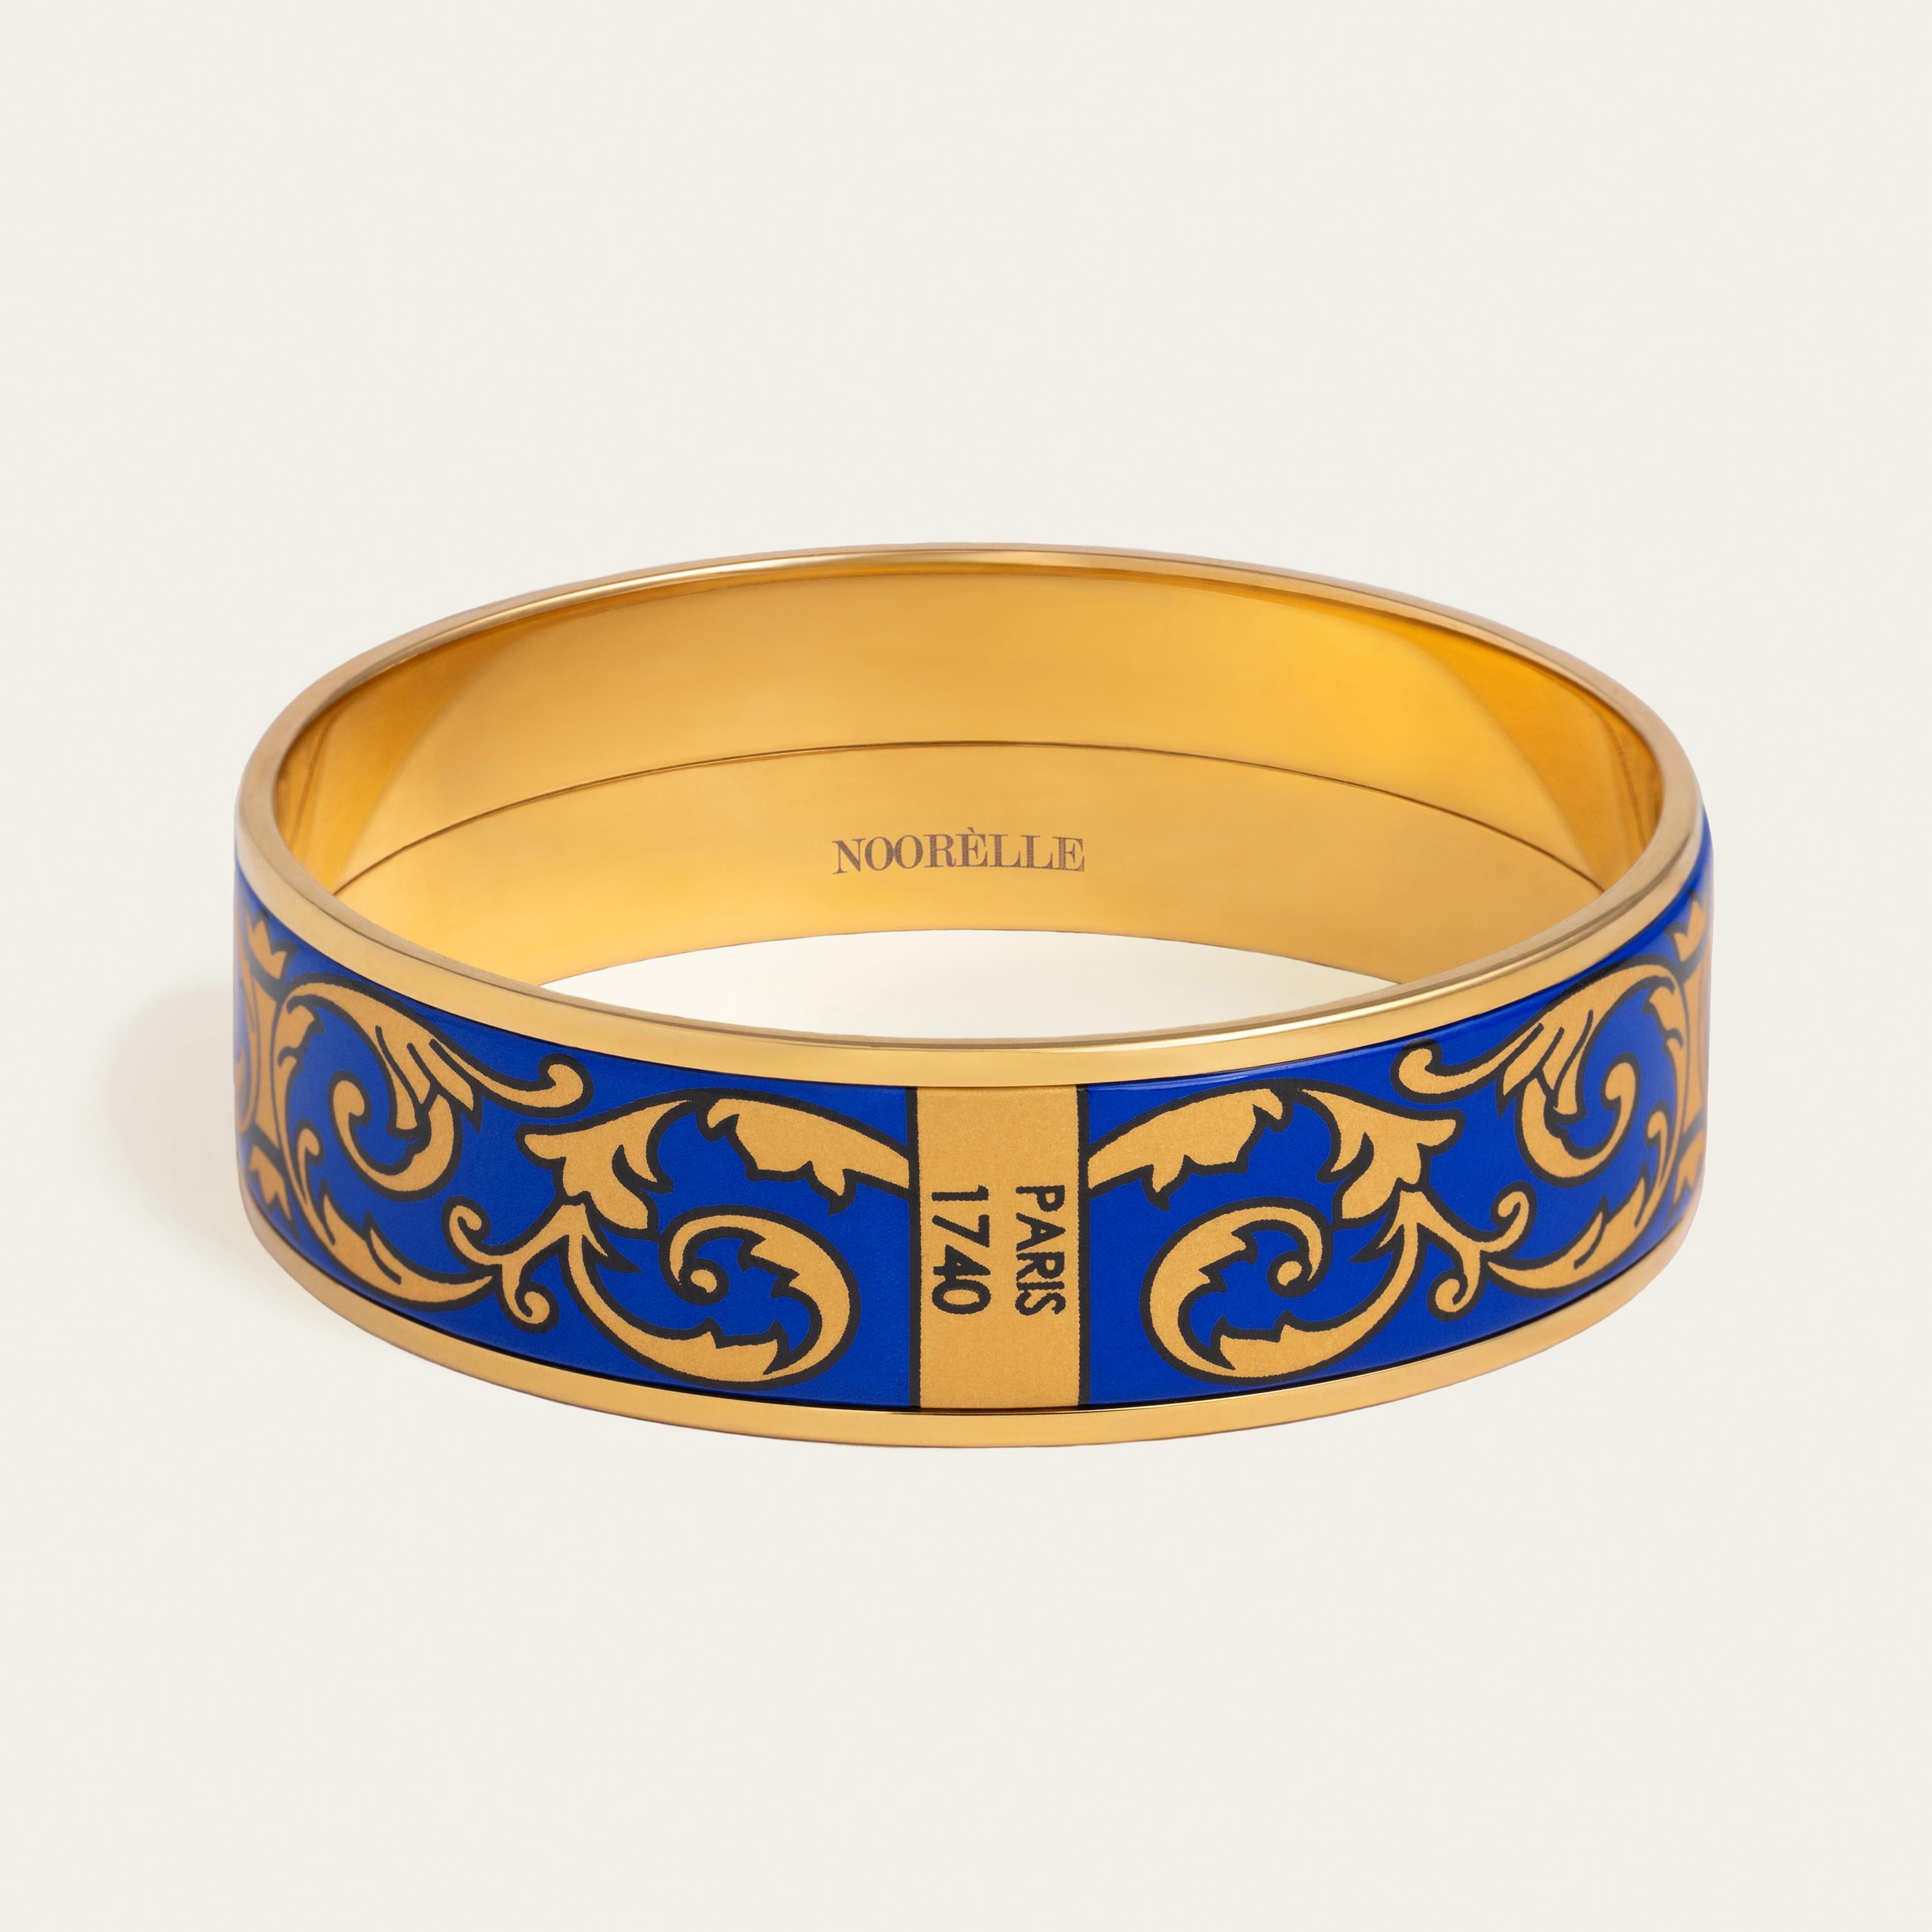 Presenting our Elle Bangle. Elevate your style with our exquisite 18k gold-plated stainless steel bangle. Hand-painted with genuine fire enamel in vivid colors that will last forever, this luxurious piece is designed to make a statement.